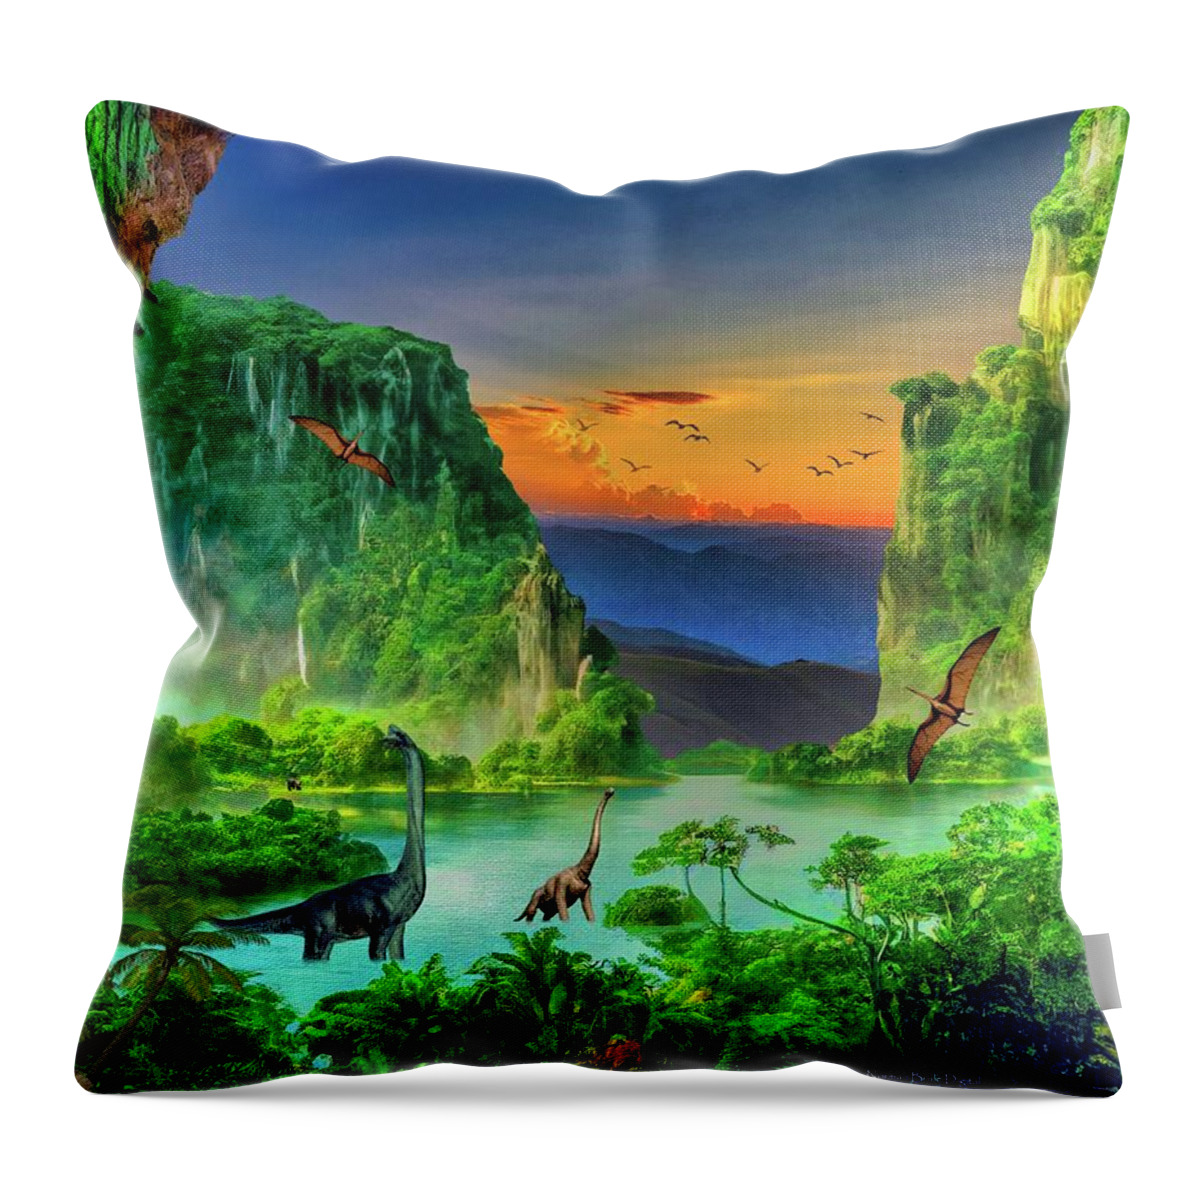 Dinosaurs Throw Pillow featuring the digital art Ancient Creation by Norman Brule